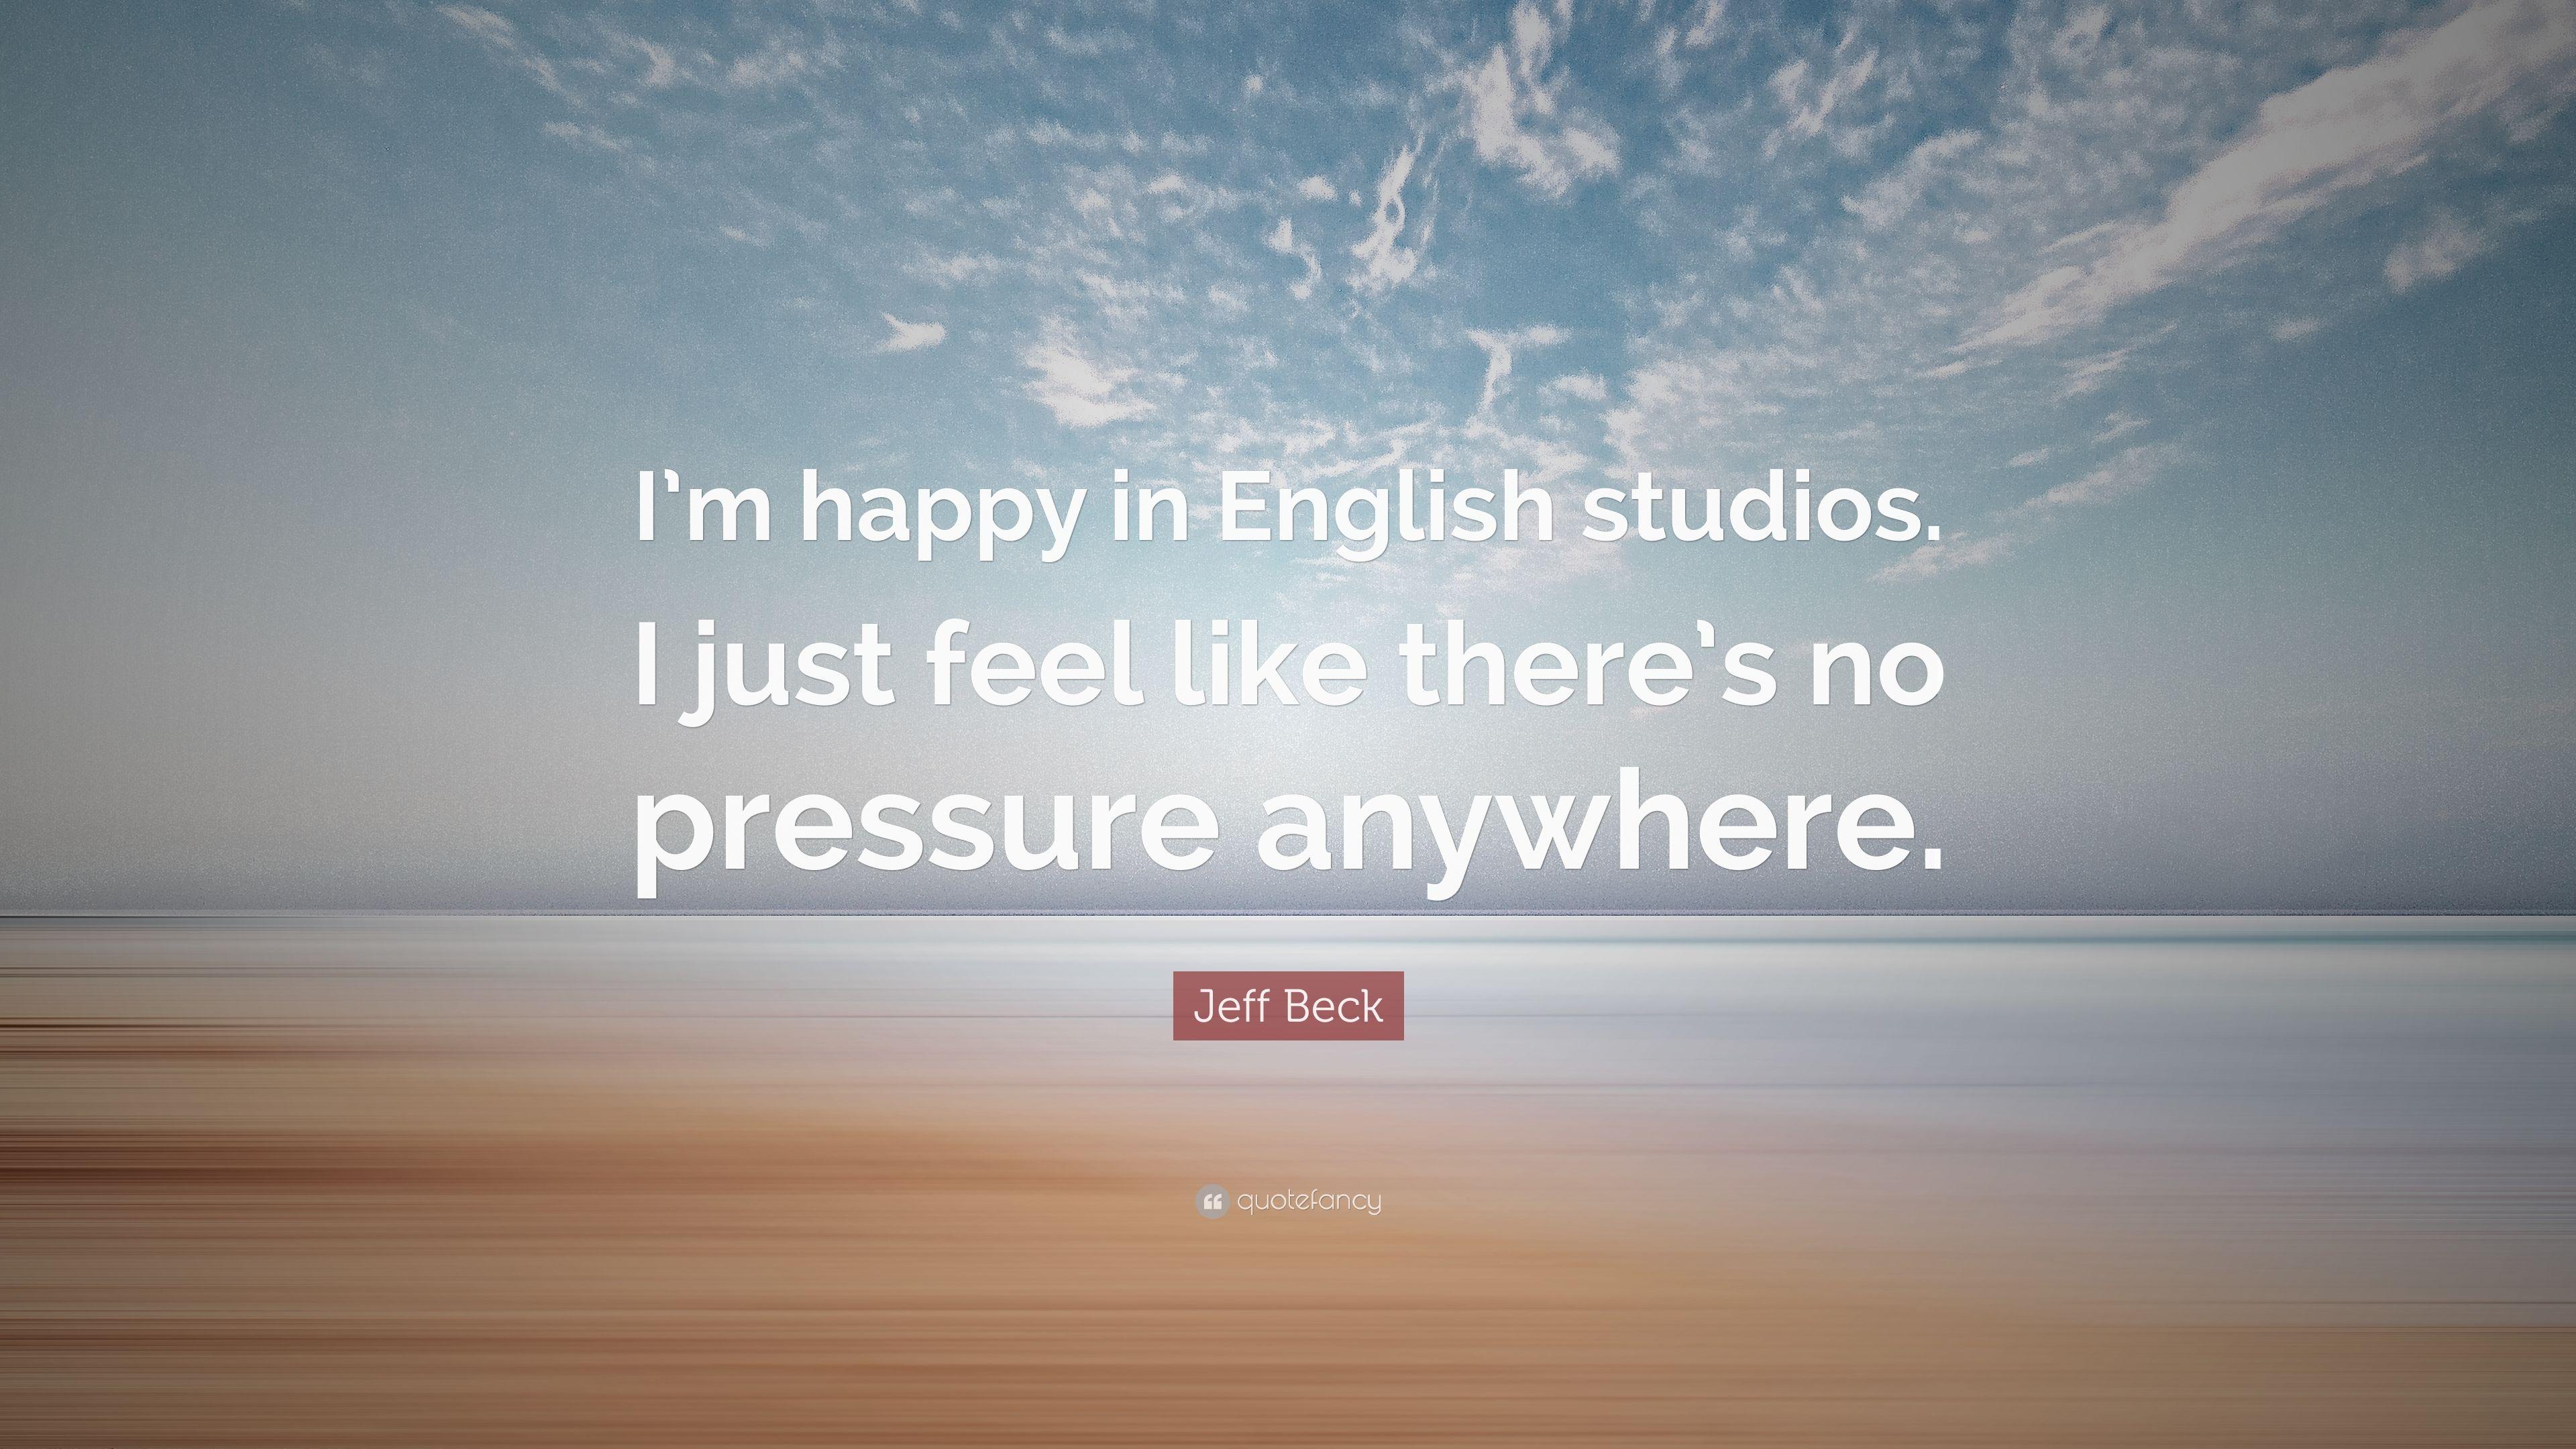 Jeff Beck Quote: “I'm happy in English studios. I just feel like